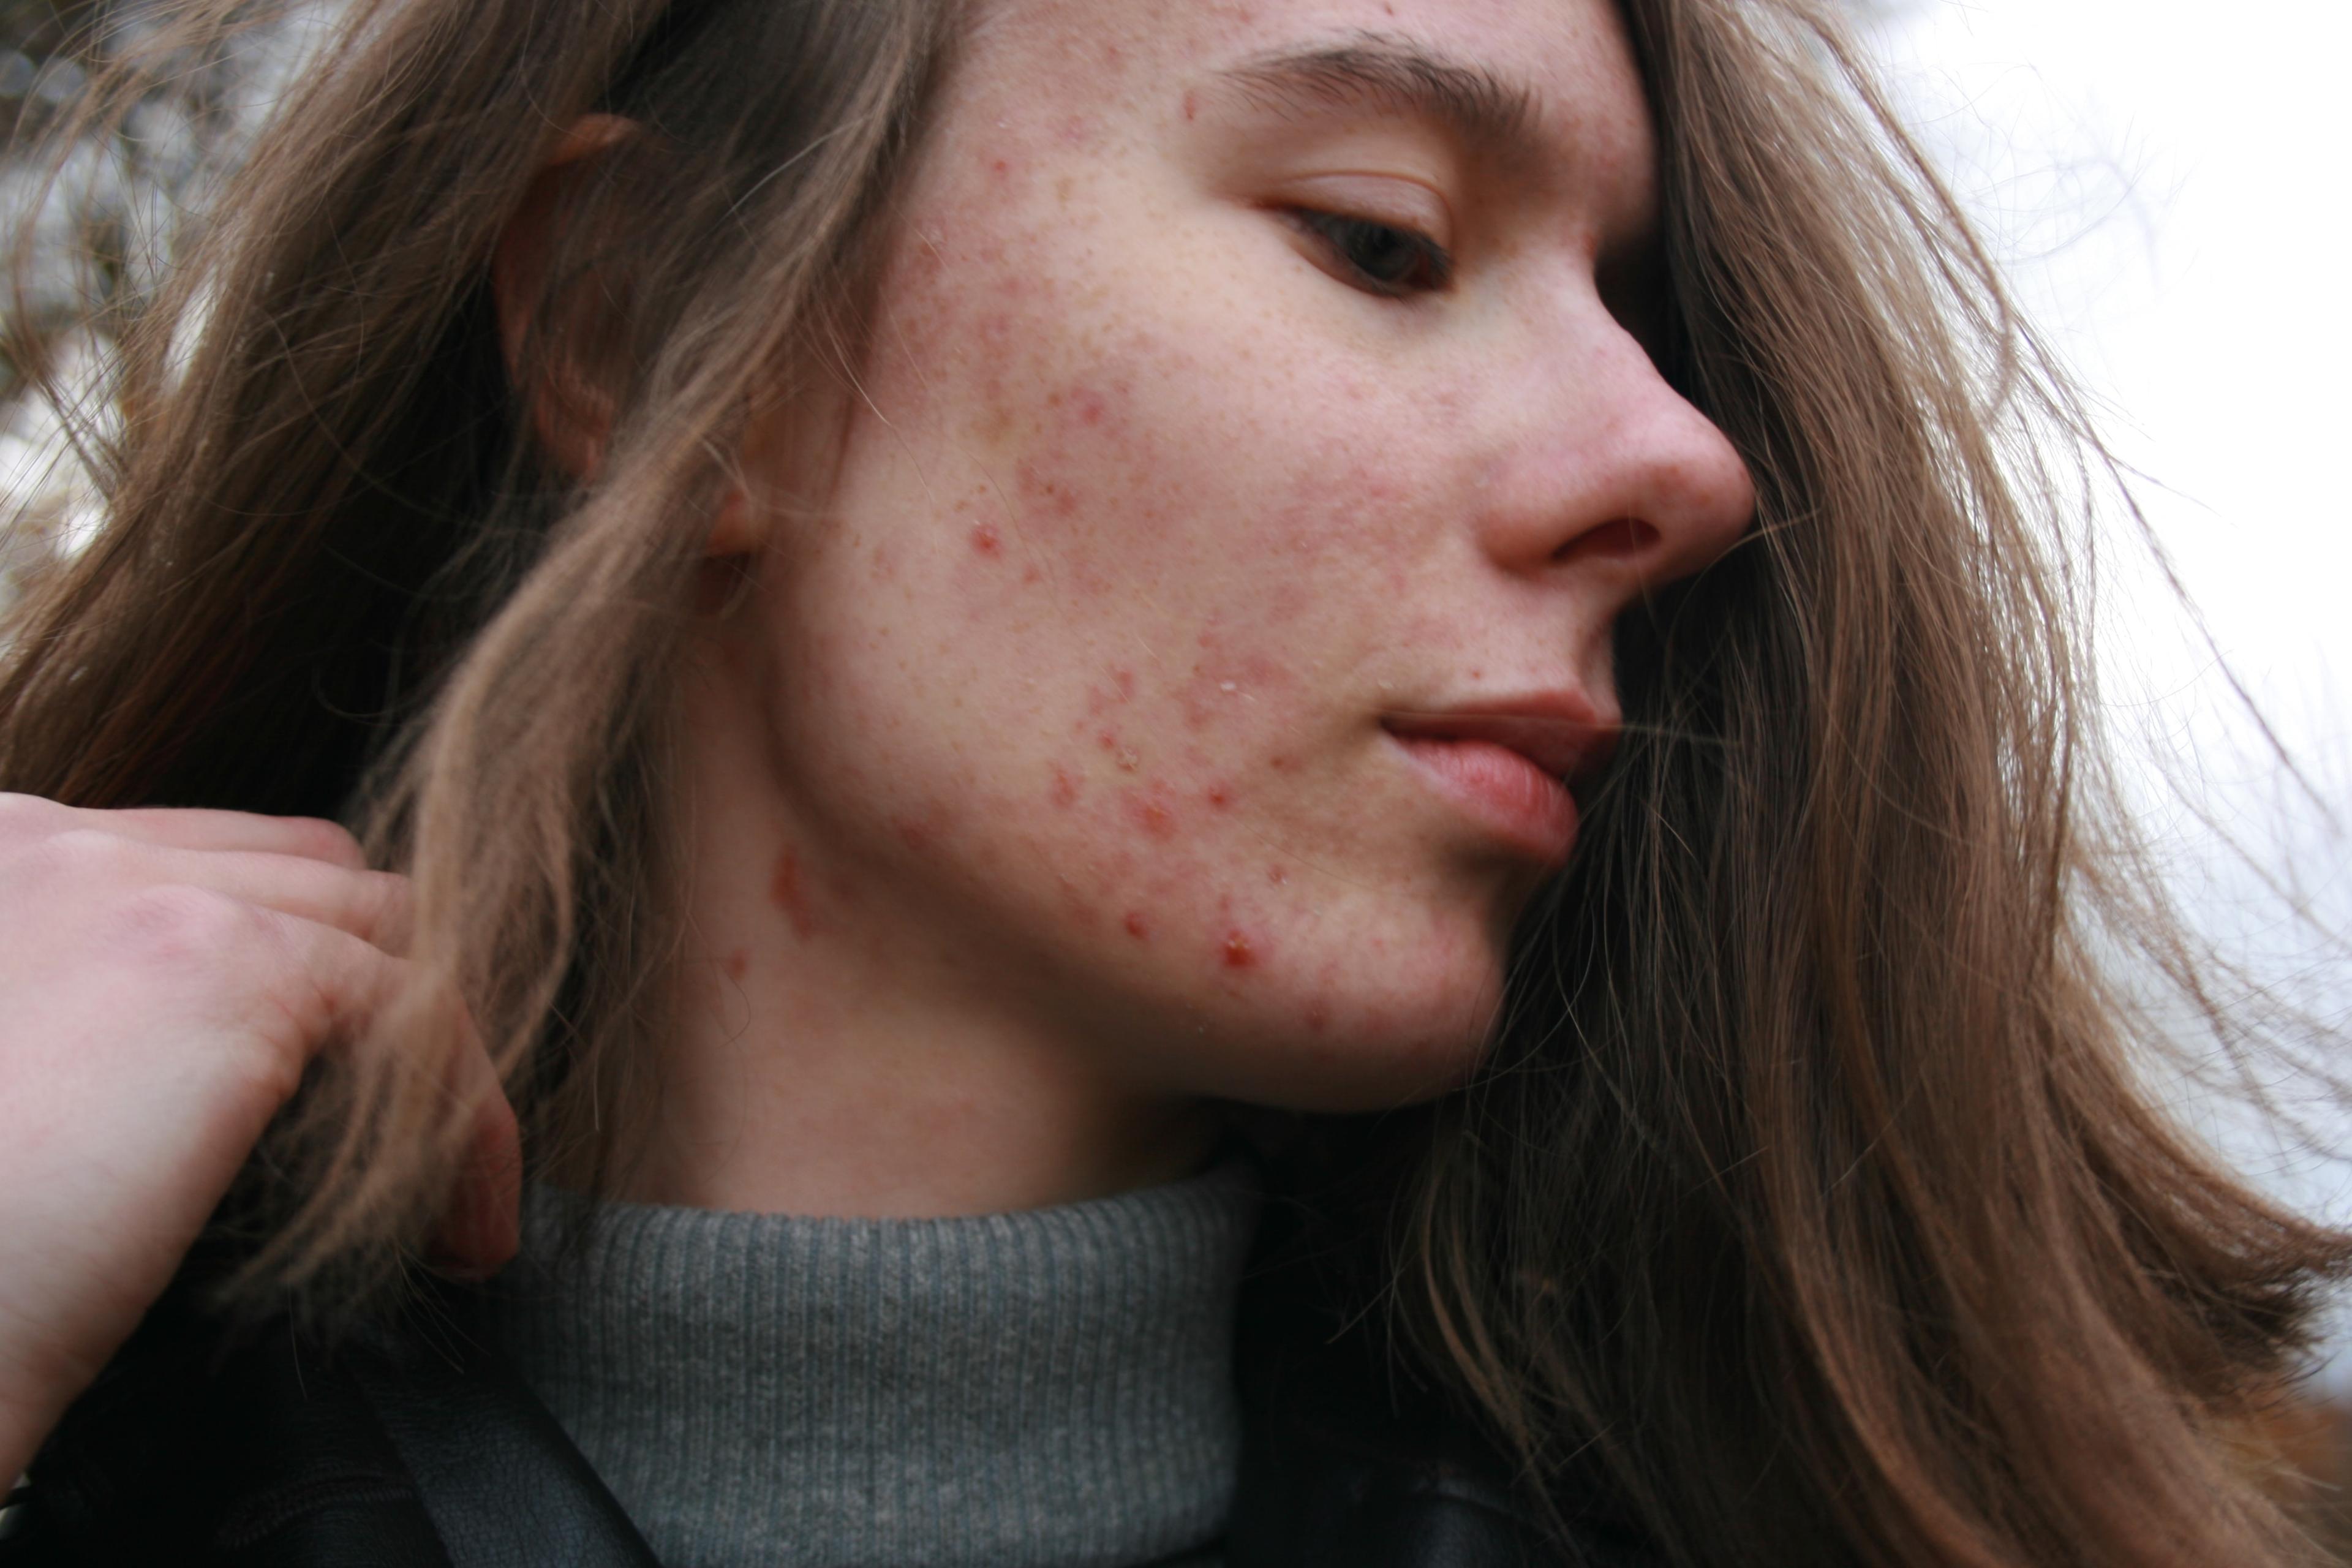 Acne Rosacea Uncovered: Understanding, Causes, and Treatment Strategies. Rosacea Treatment: Review and Update. Exploring the Pathogenesis and Mechanism-Targeted Treatments of Rosacea: Previous Understanding and Updates